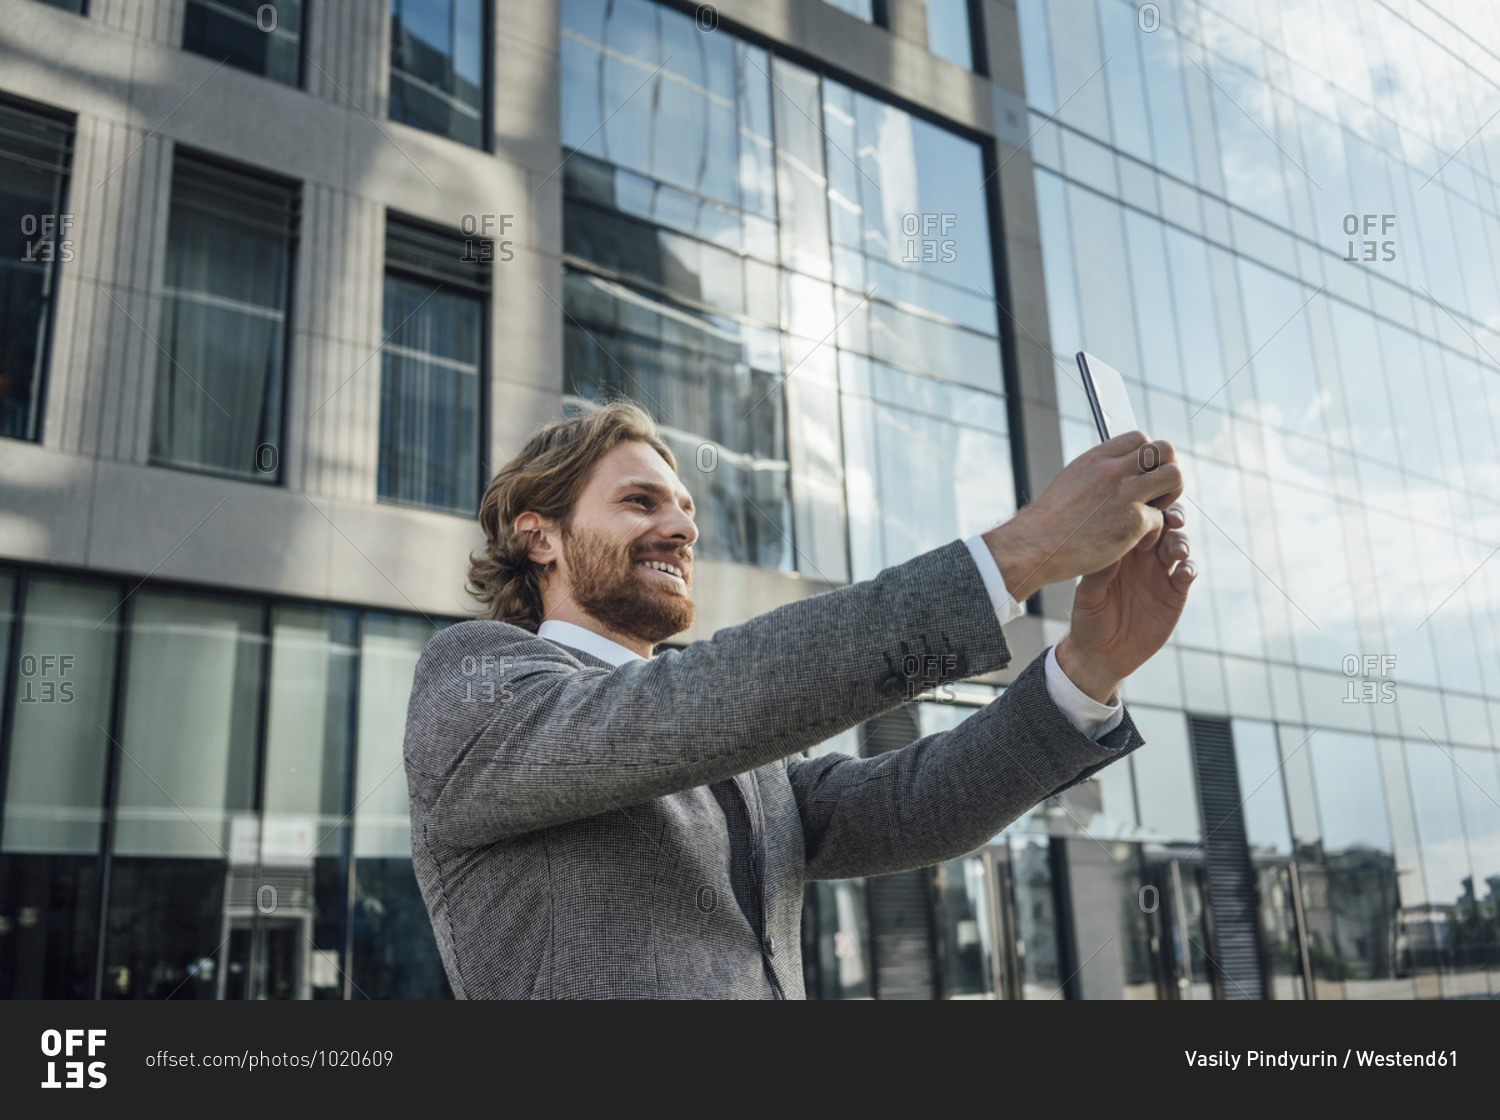 Smiling male professional taking selfie against office building at downtown district